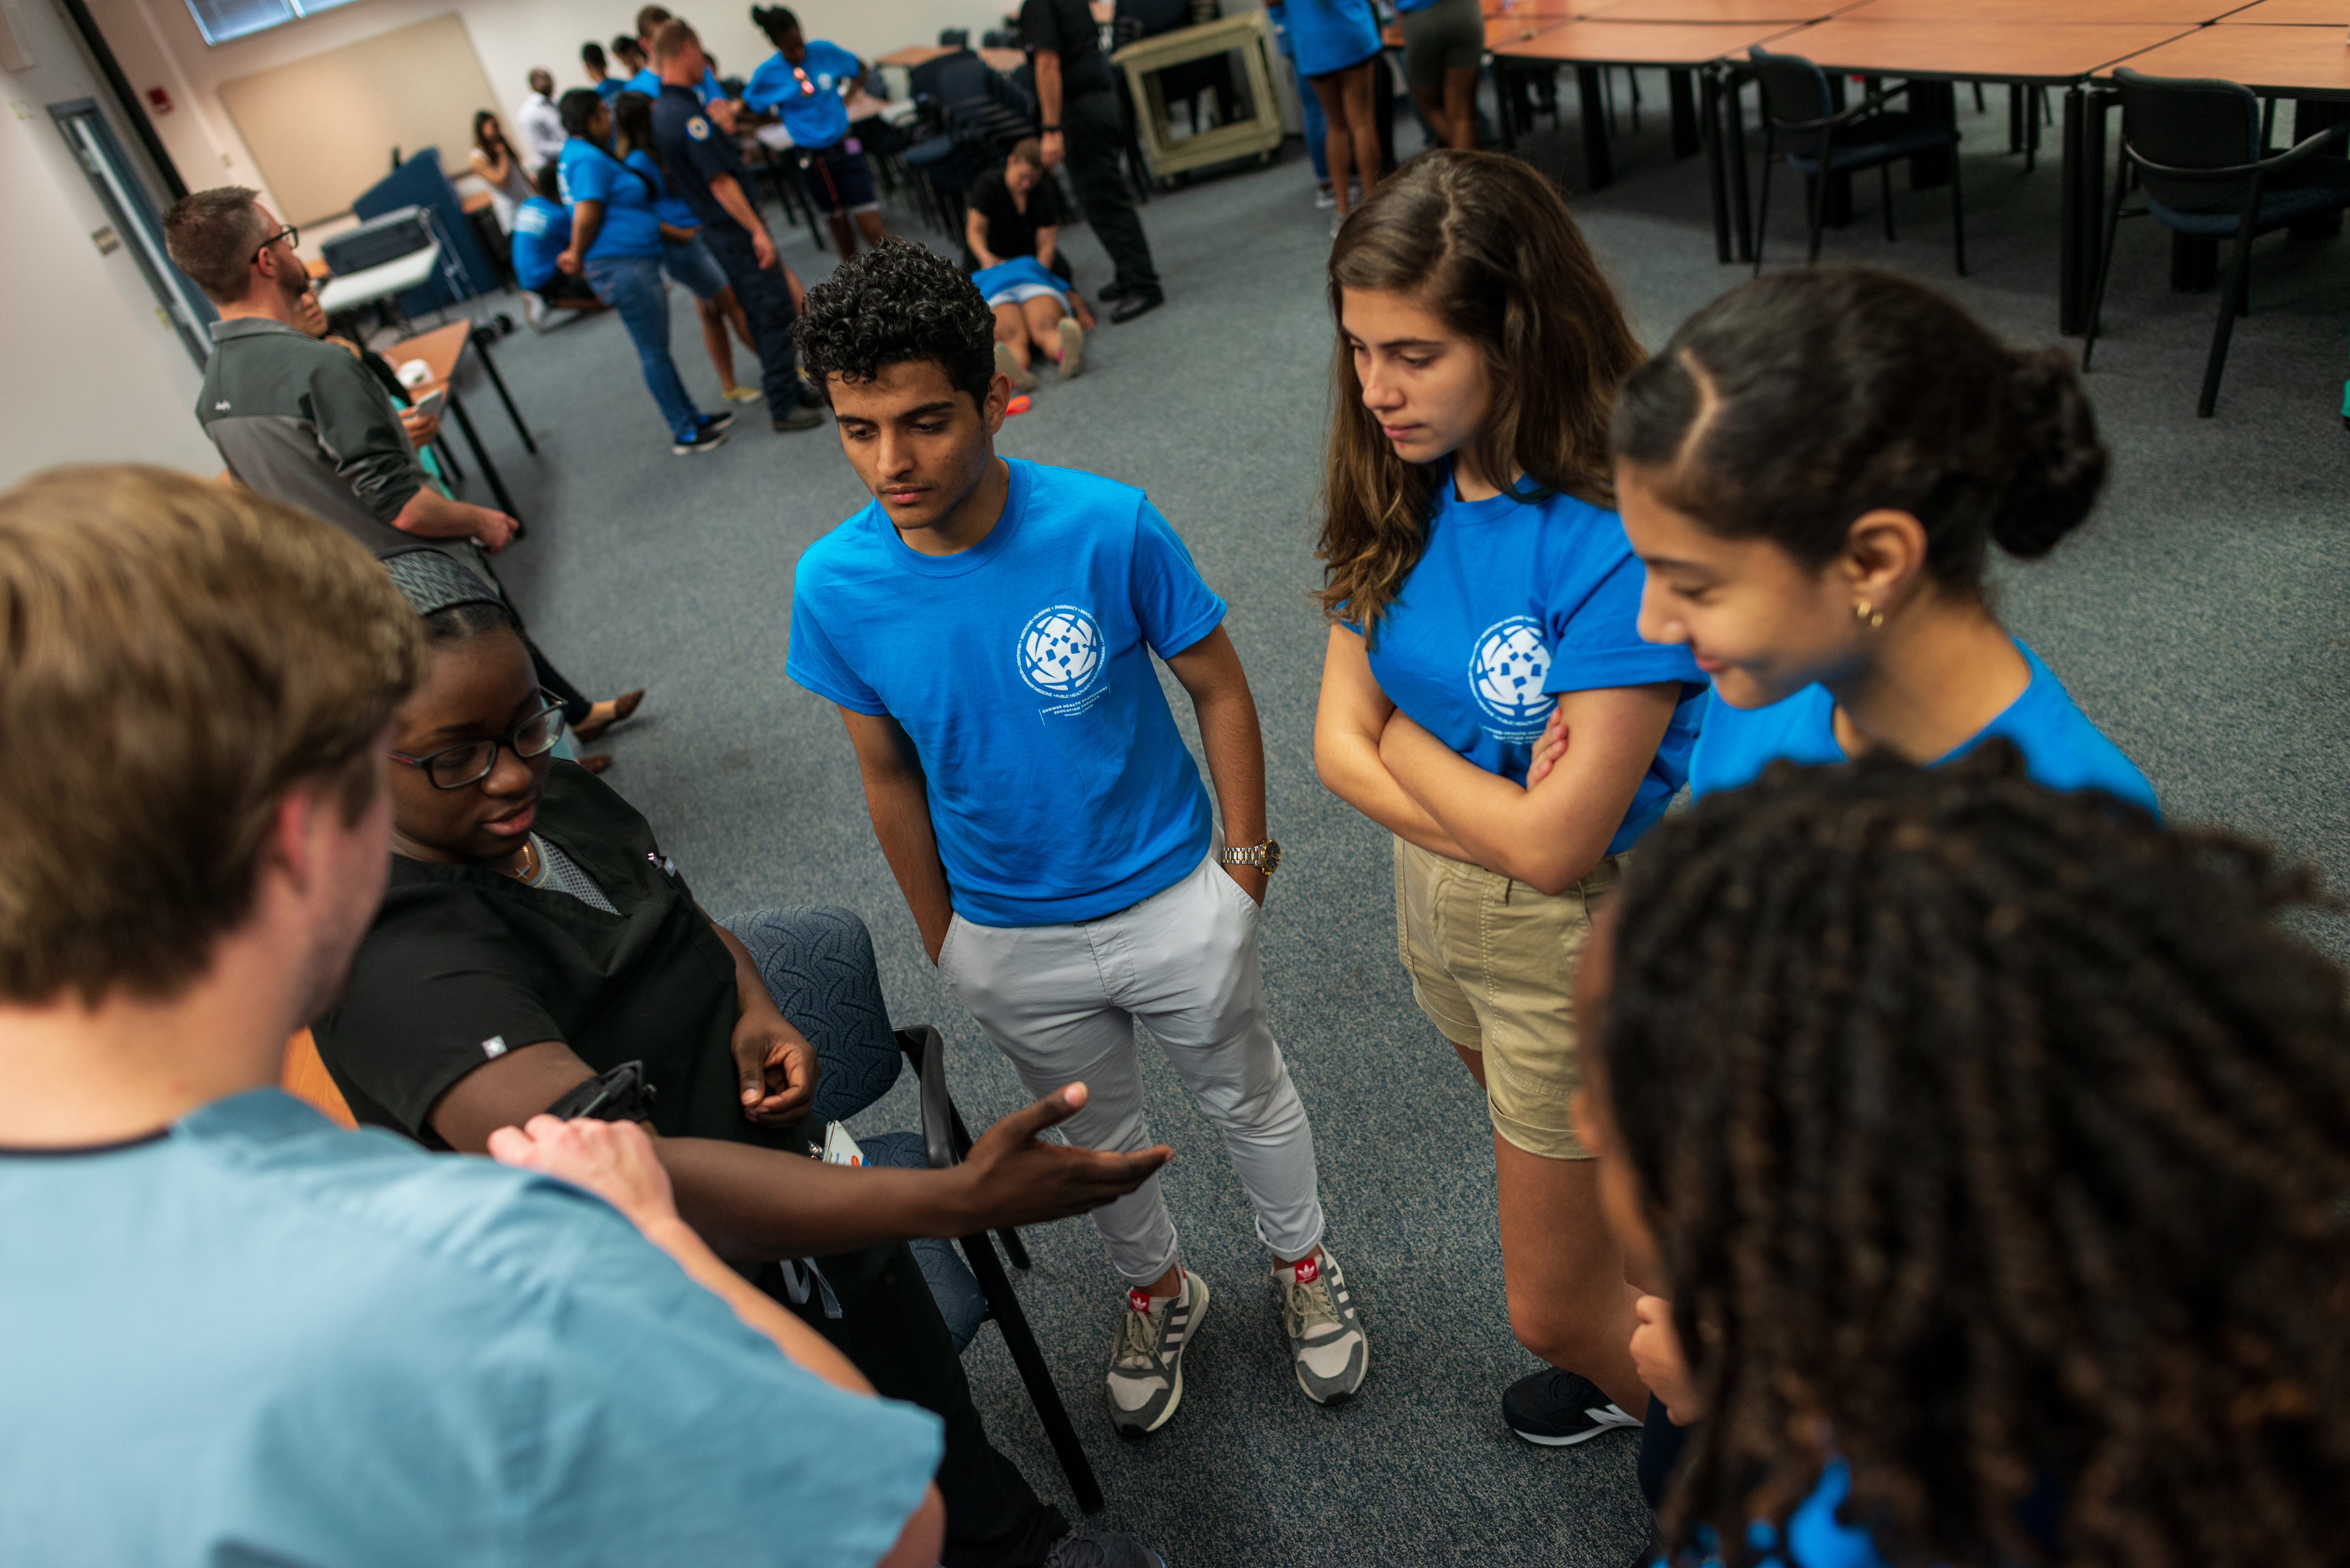 Students in matching tshirts gather around a person in scrubs demonstrating a medical procedure on another person in scrubs